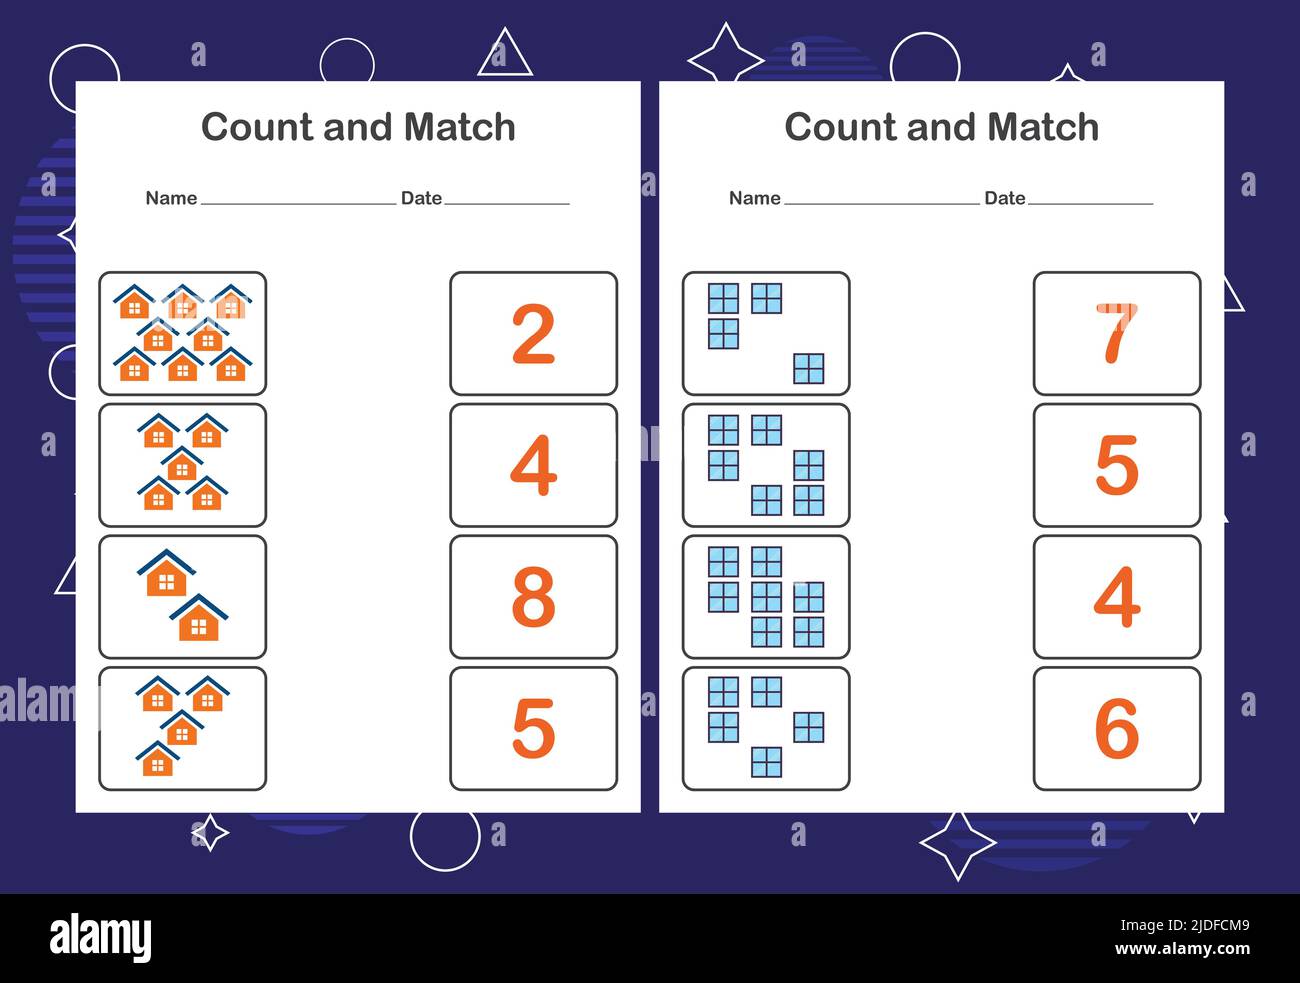 Count and Match worksheet for kids. Count and match with the correct number. Matching education game. Stock Vector